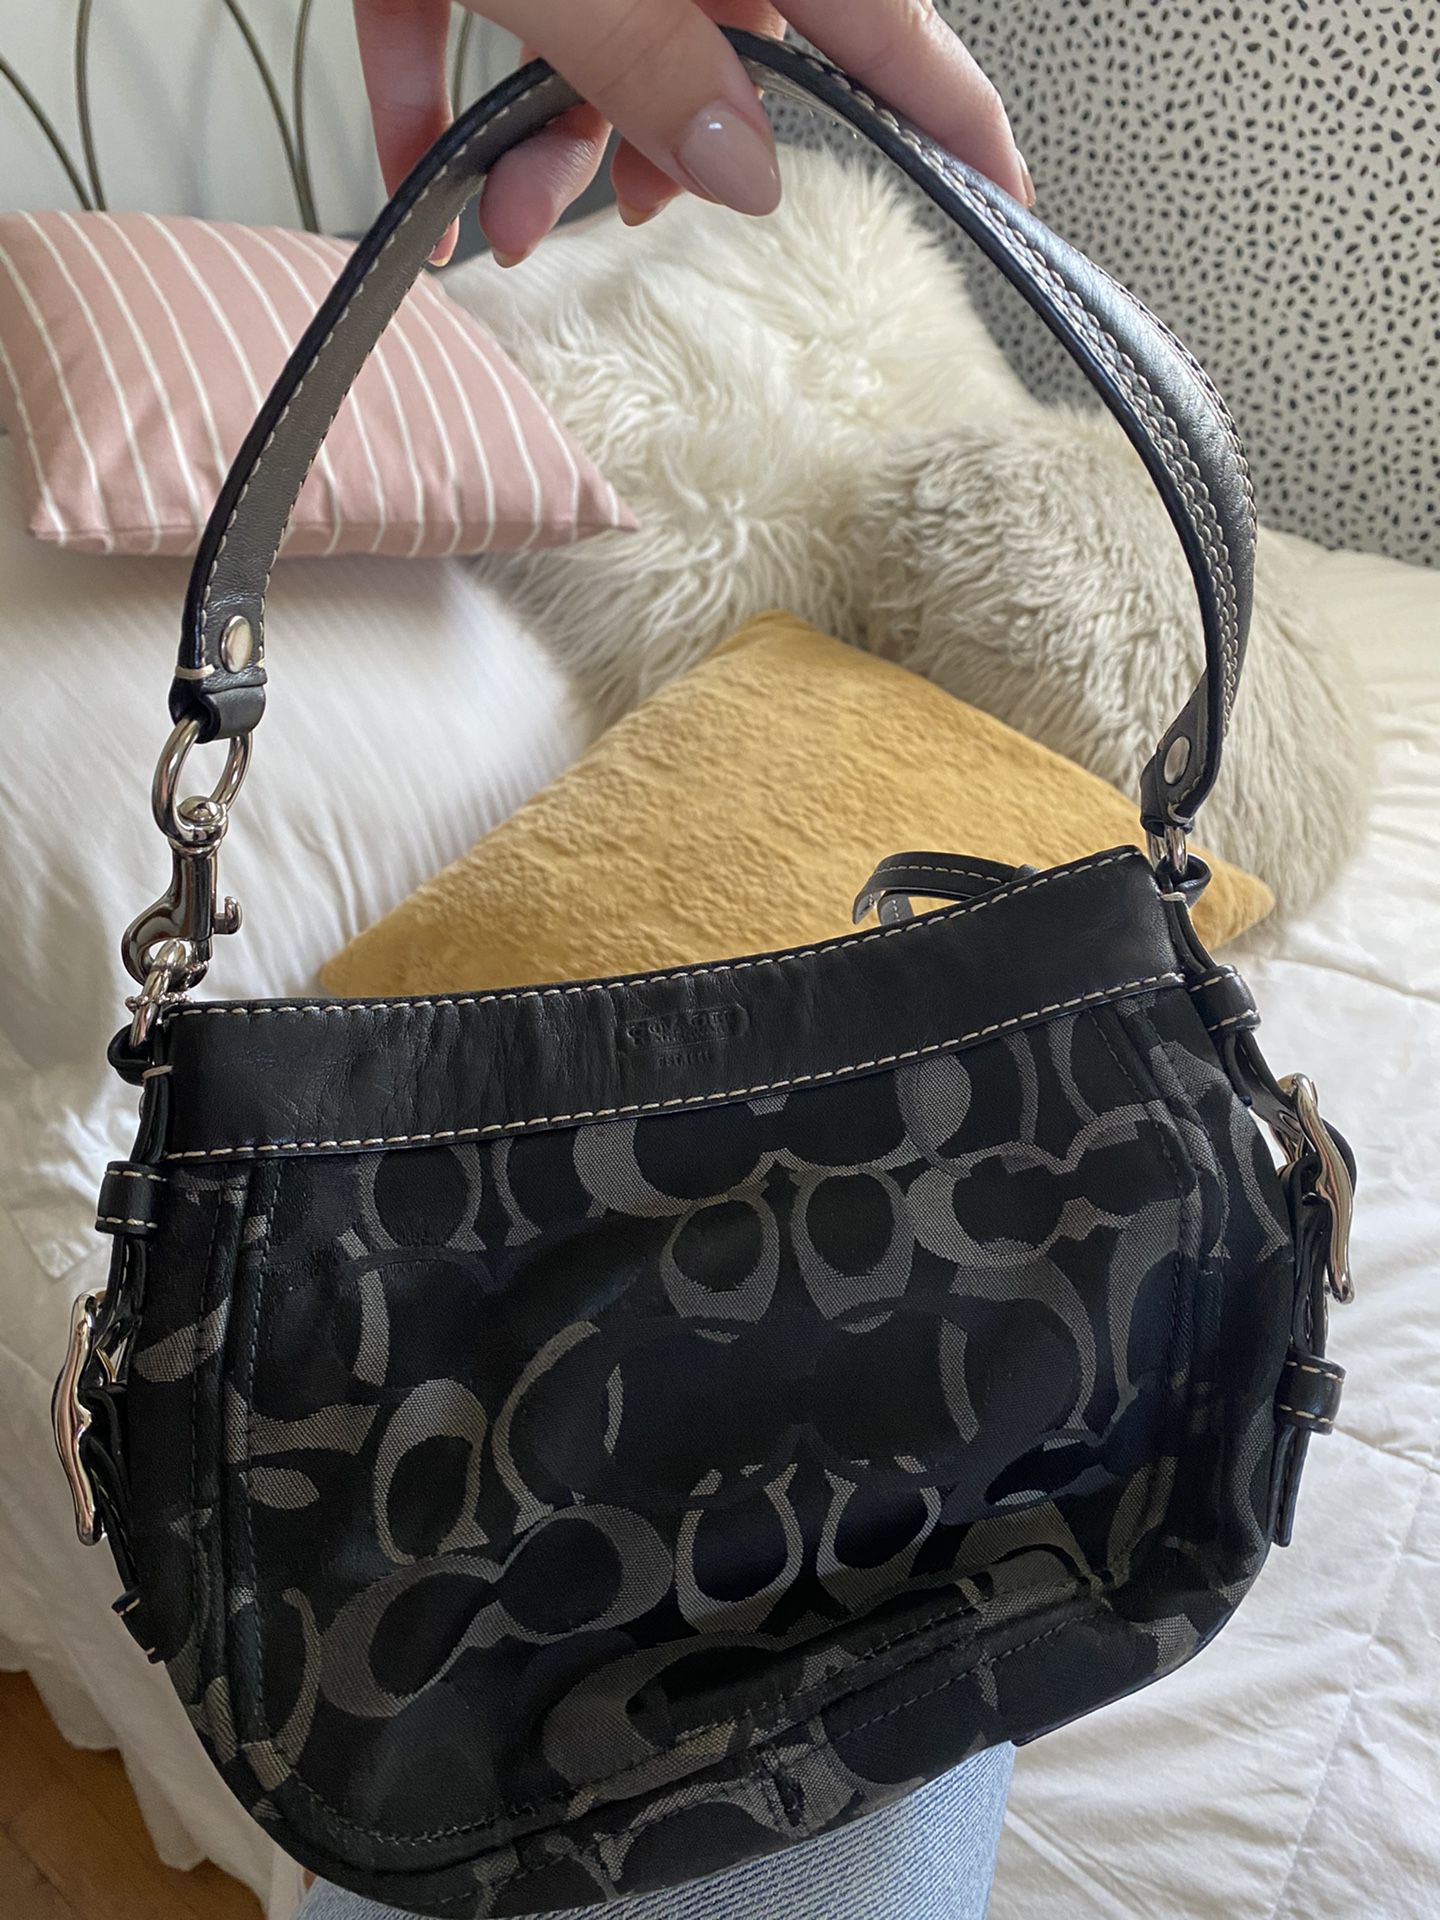 Black Couch small purse never used